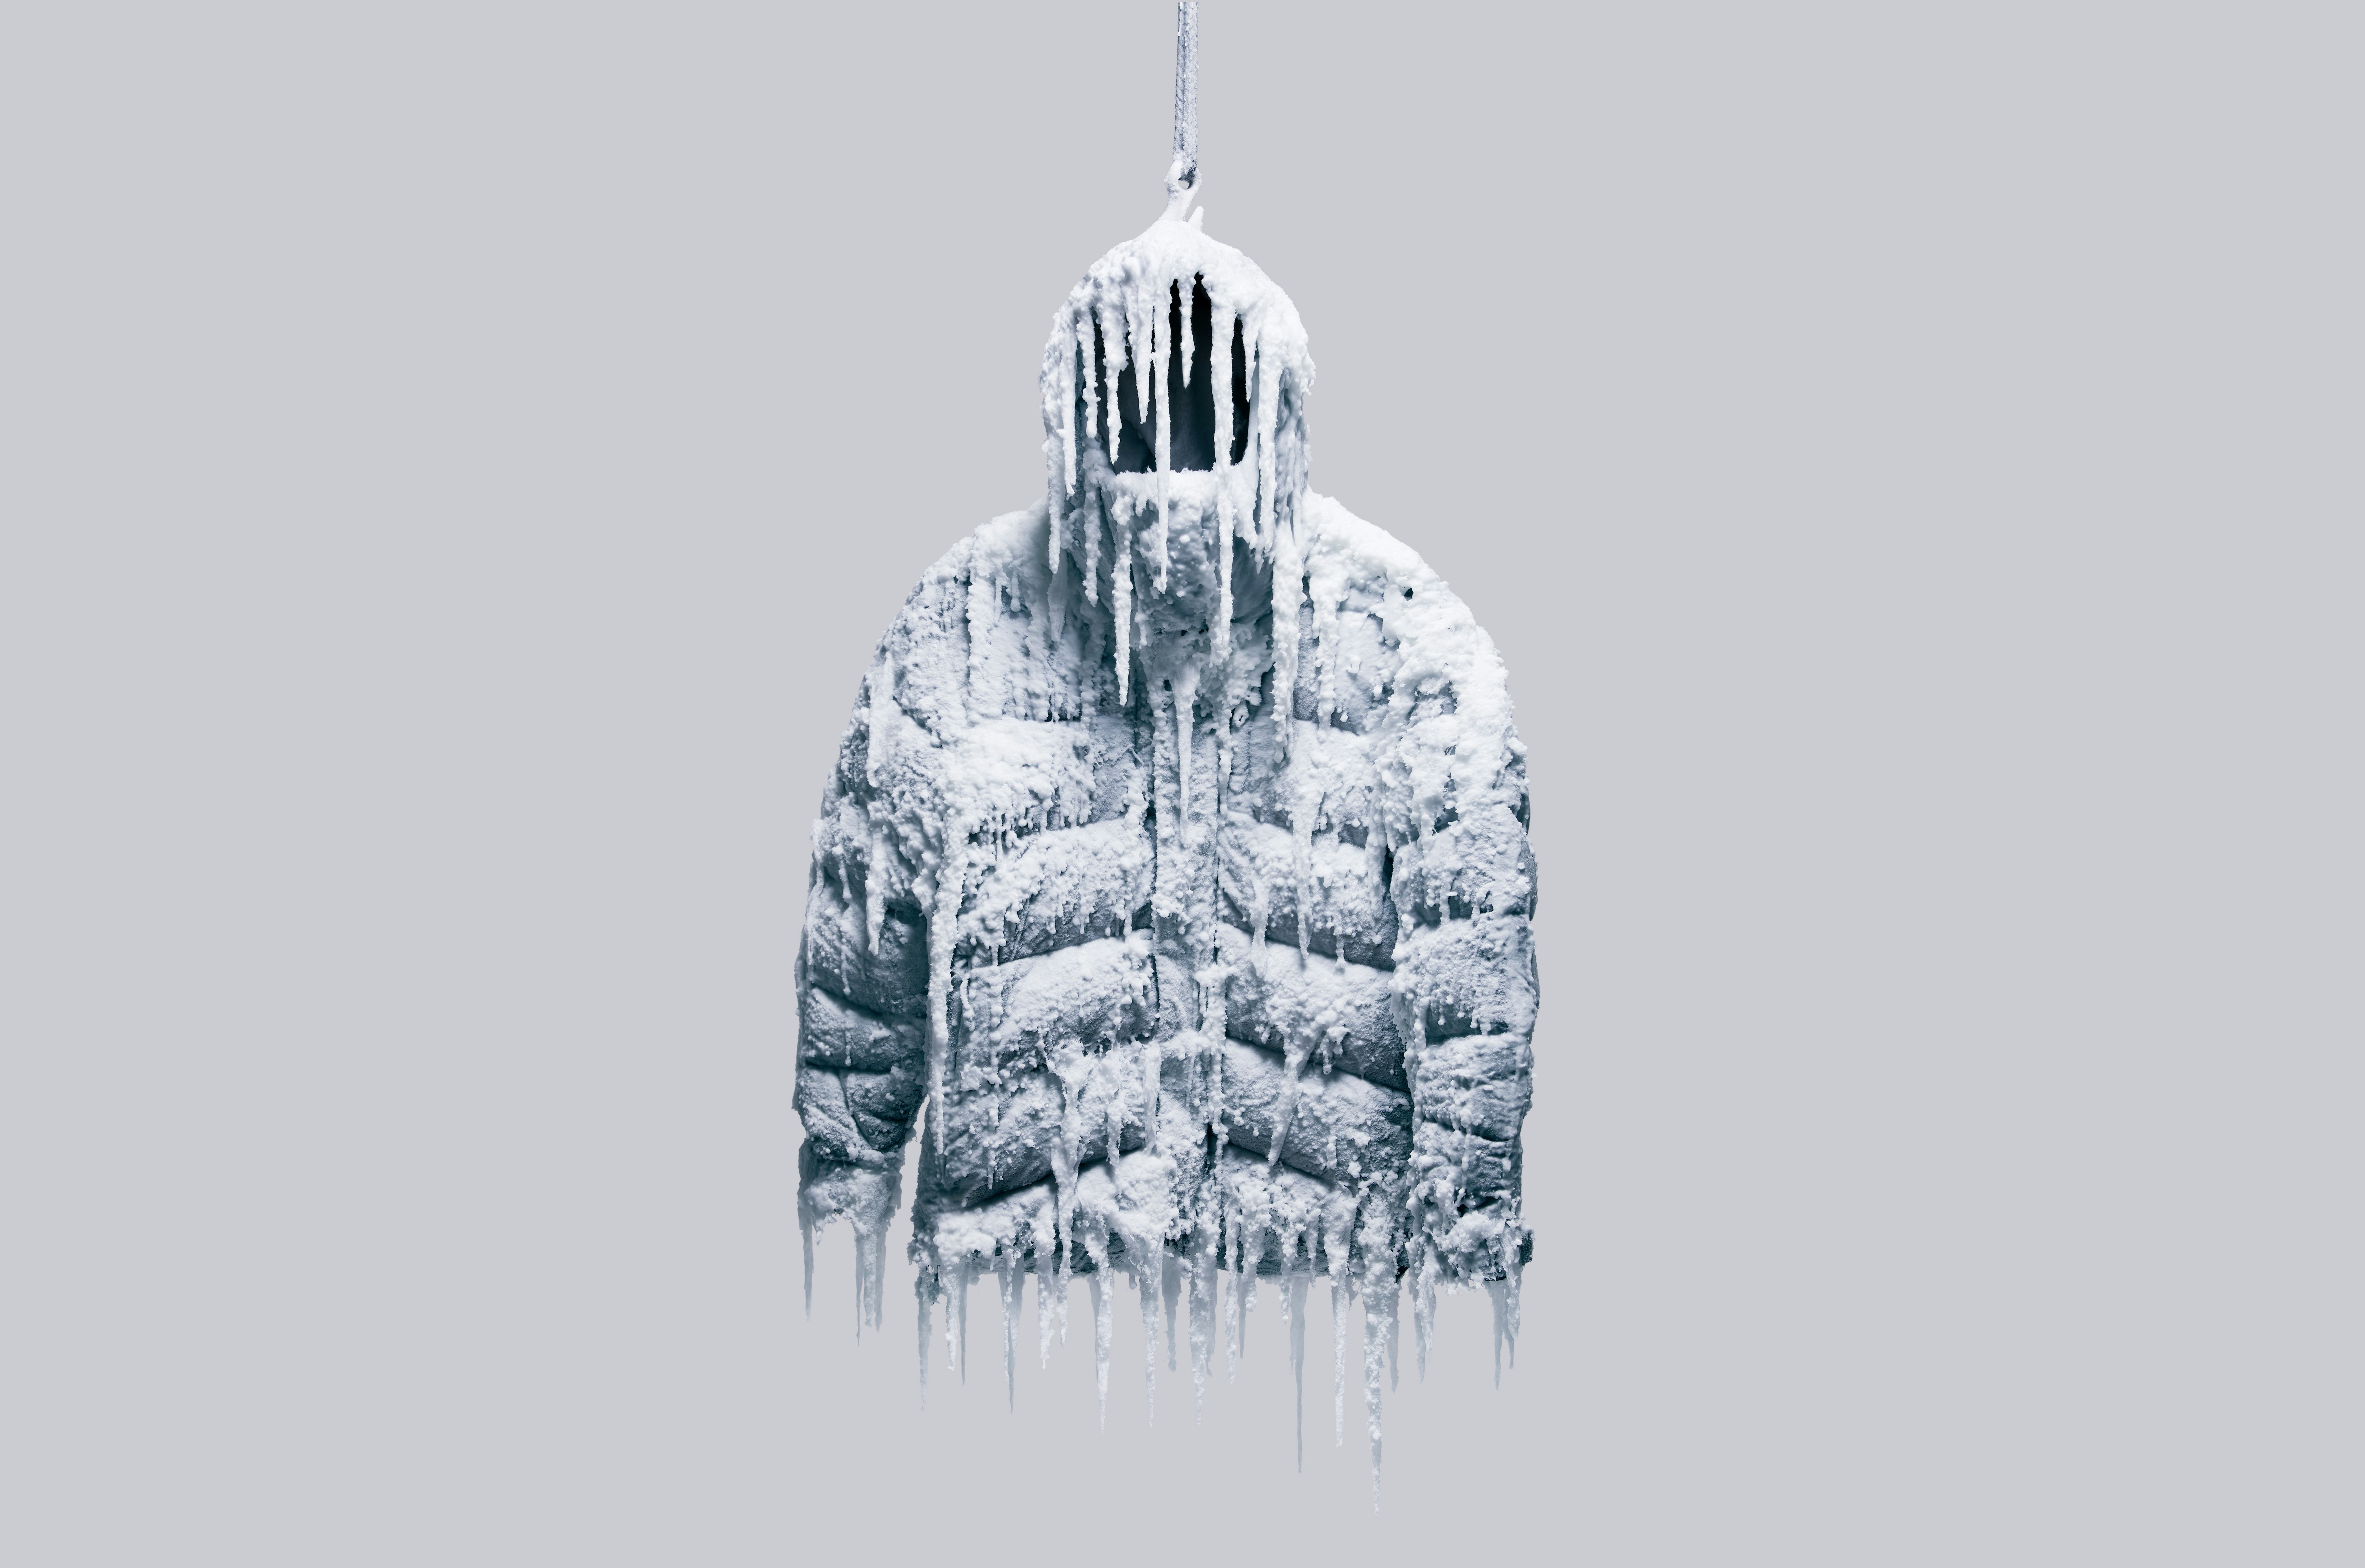 The indestructible puffer jacket covered in ice